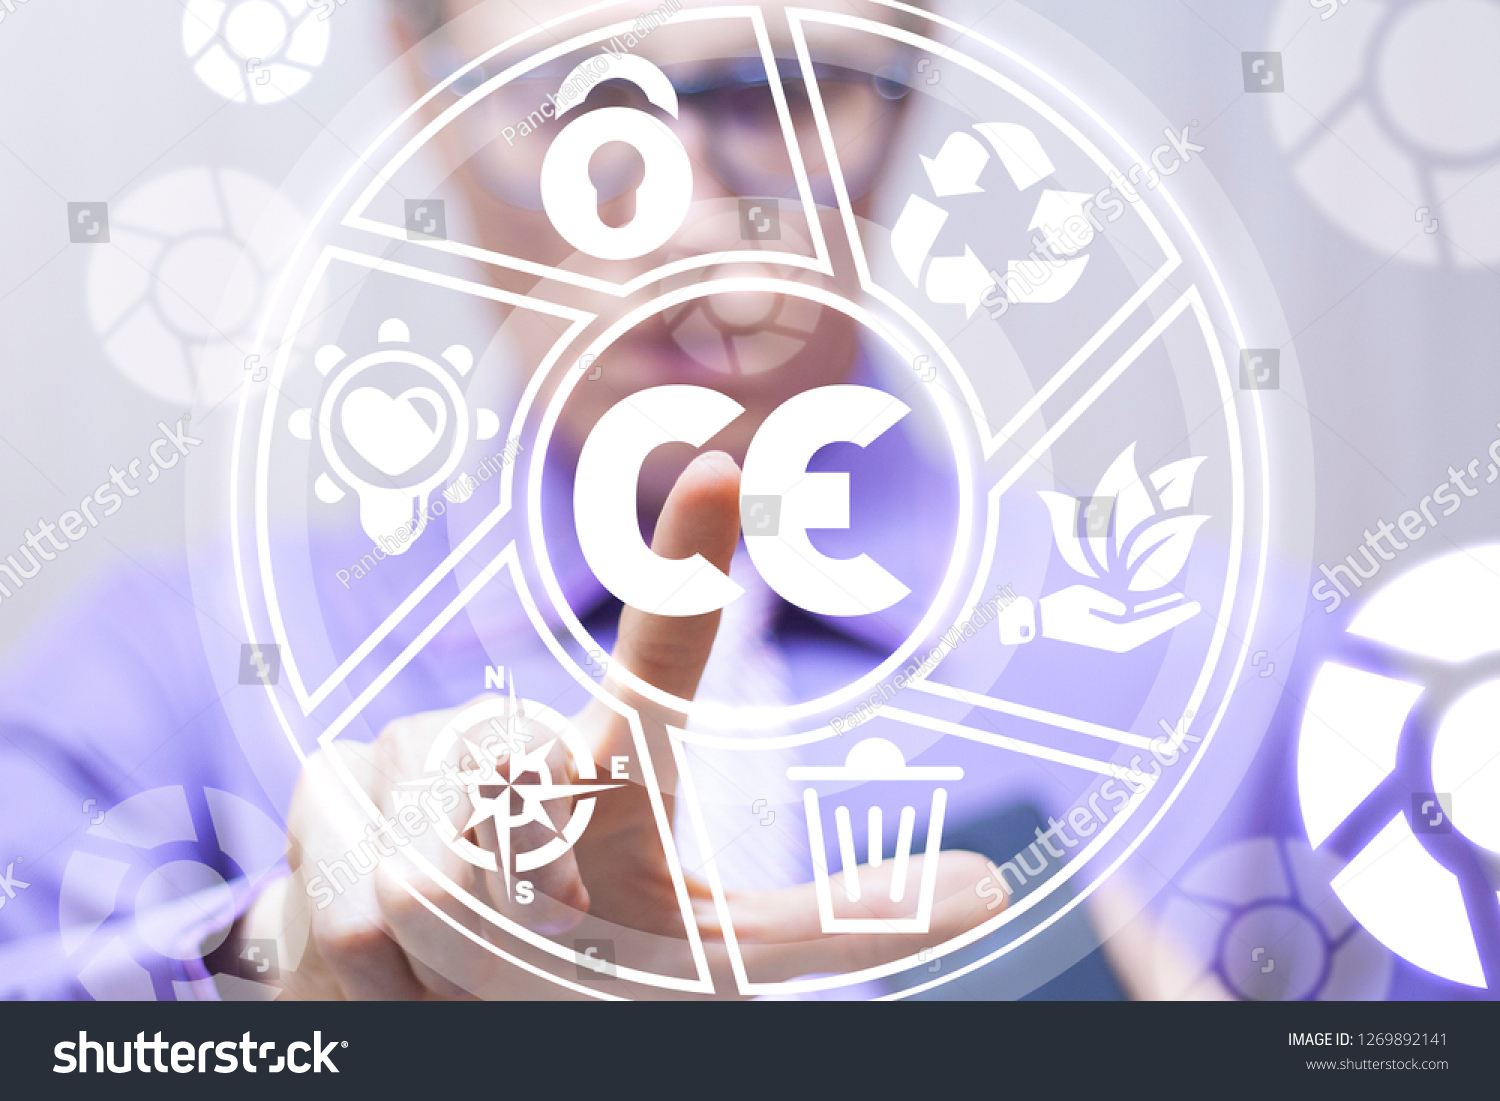 Man pushing a ce abbreviation icon on a virtual screen. CE - european conformity certification mark business industry system. #1269892141